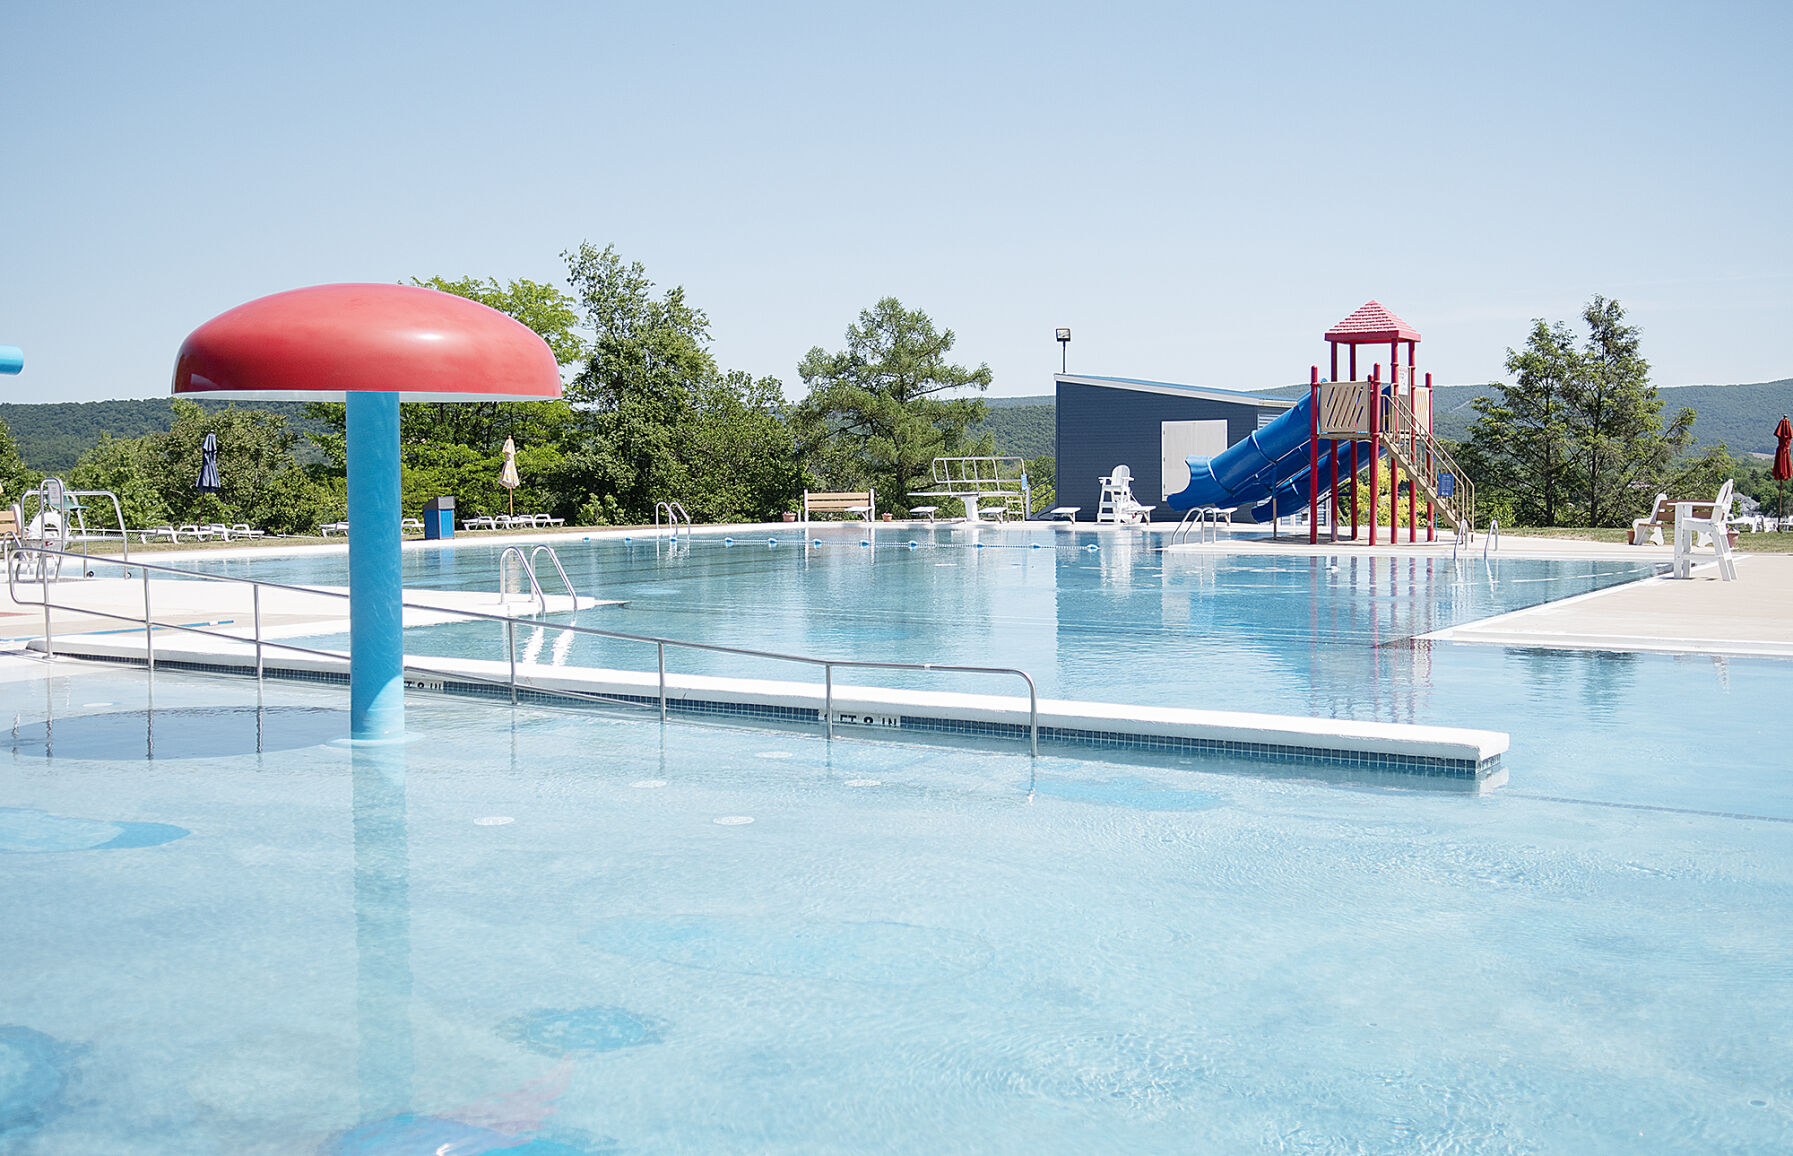 Valleys community pools start to open for summer fun News dailyitem image